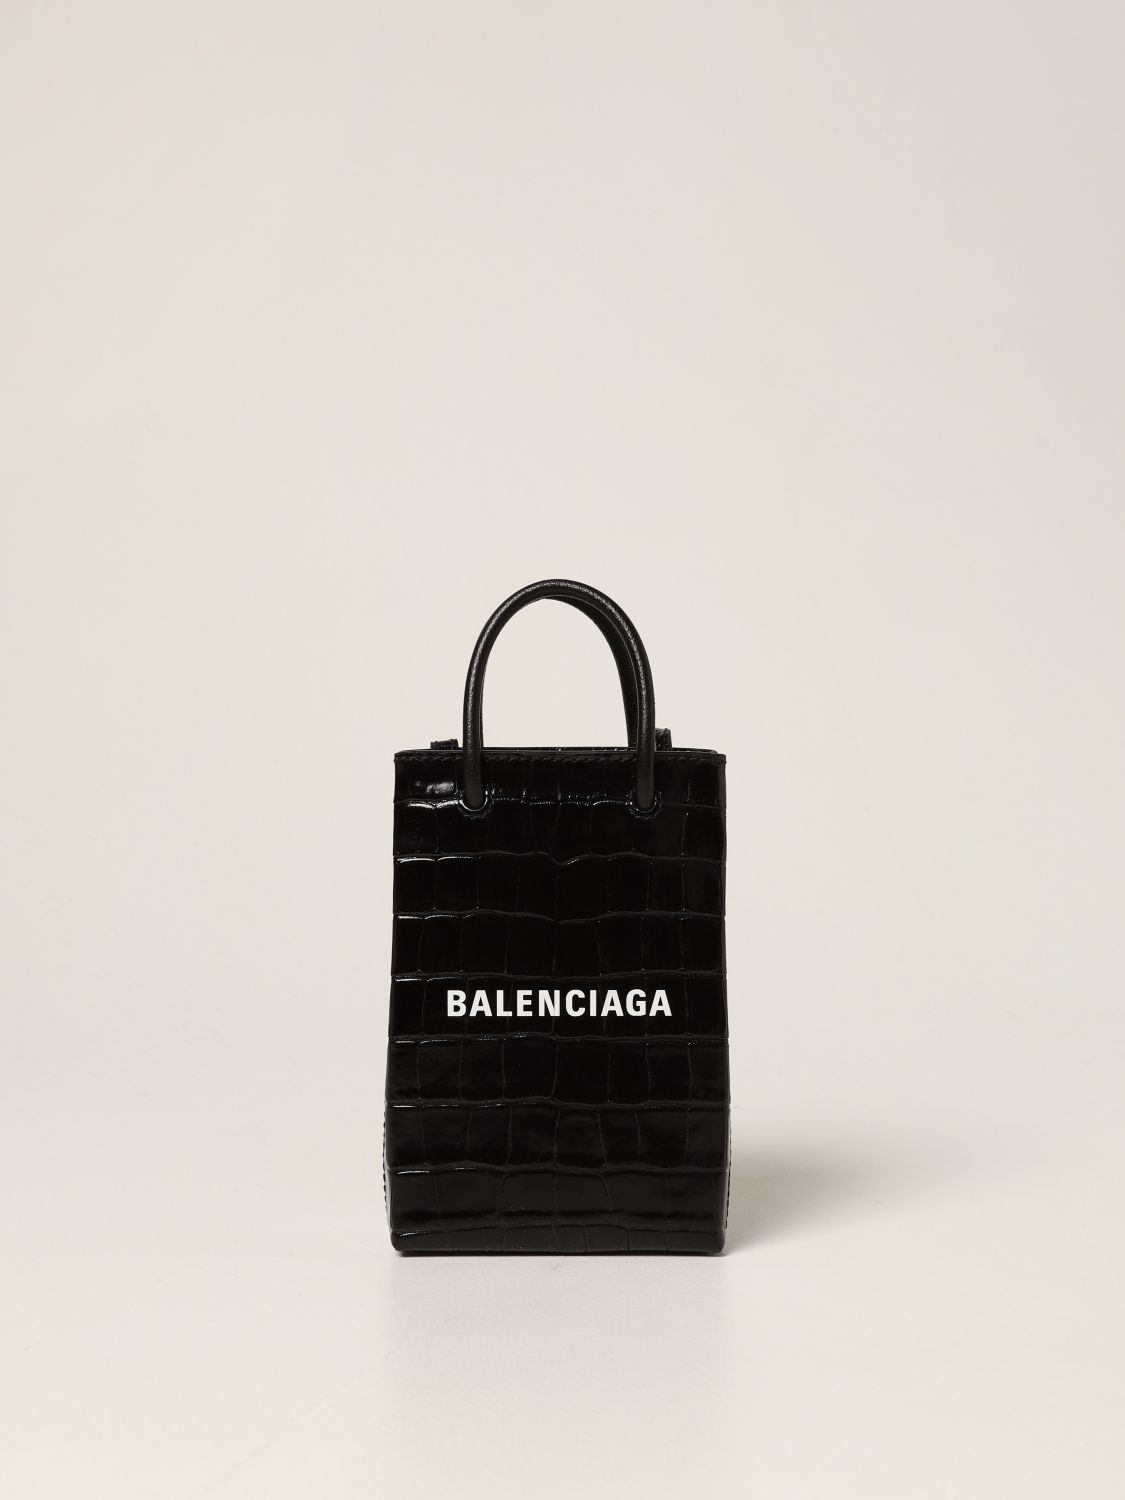 Shop tote bags and phone covers from Balenciaga x Crocs collaboration